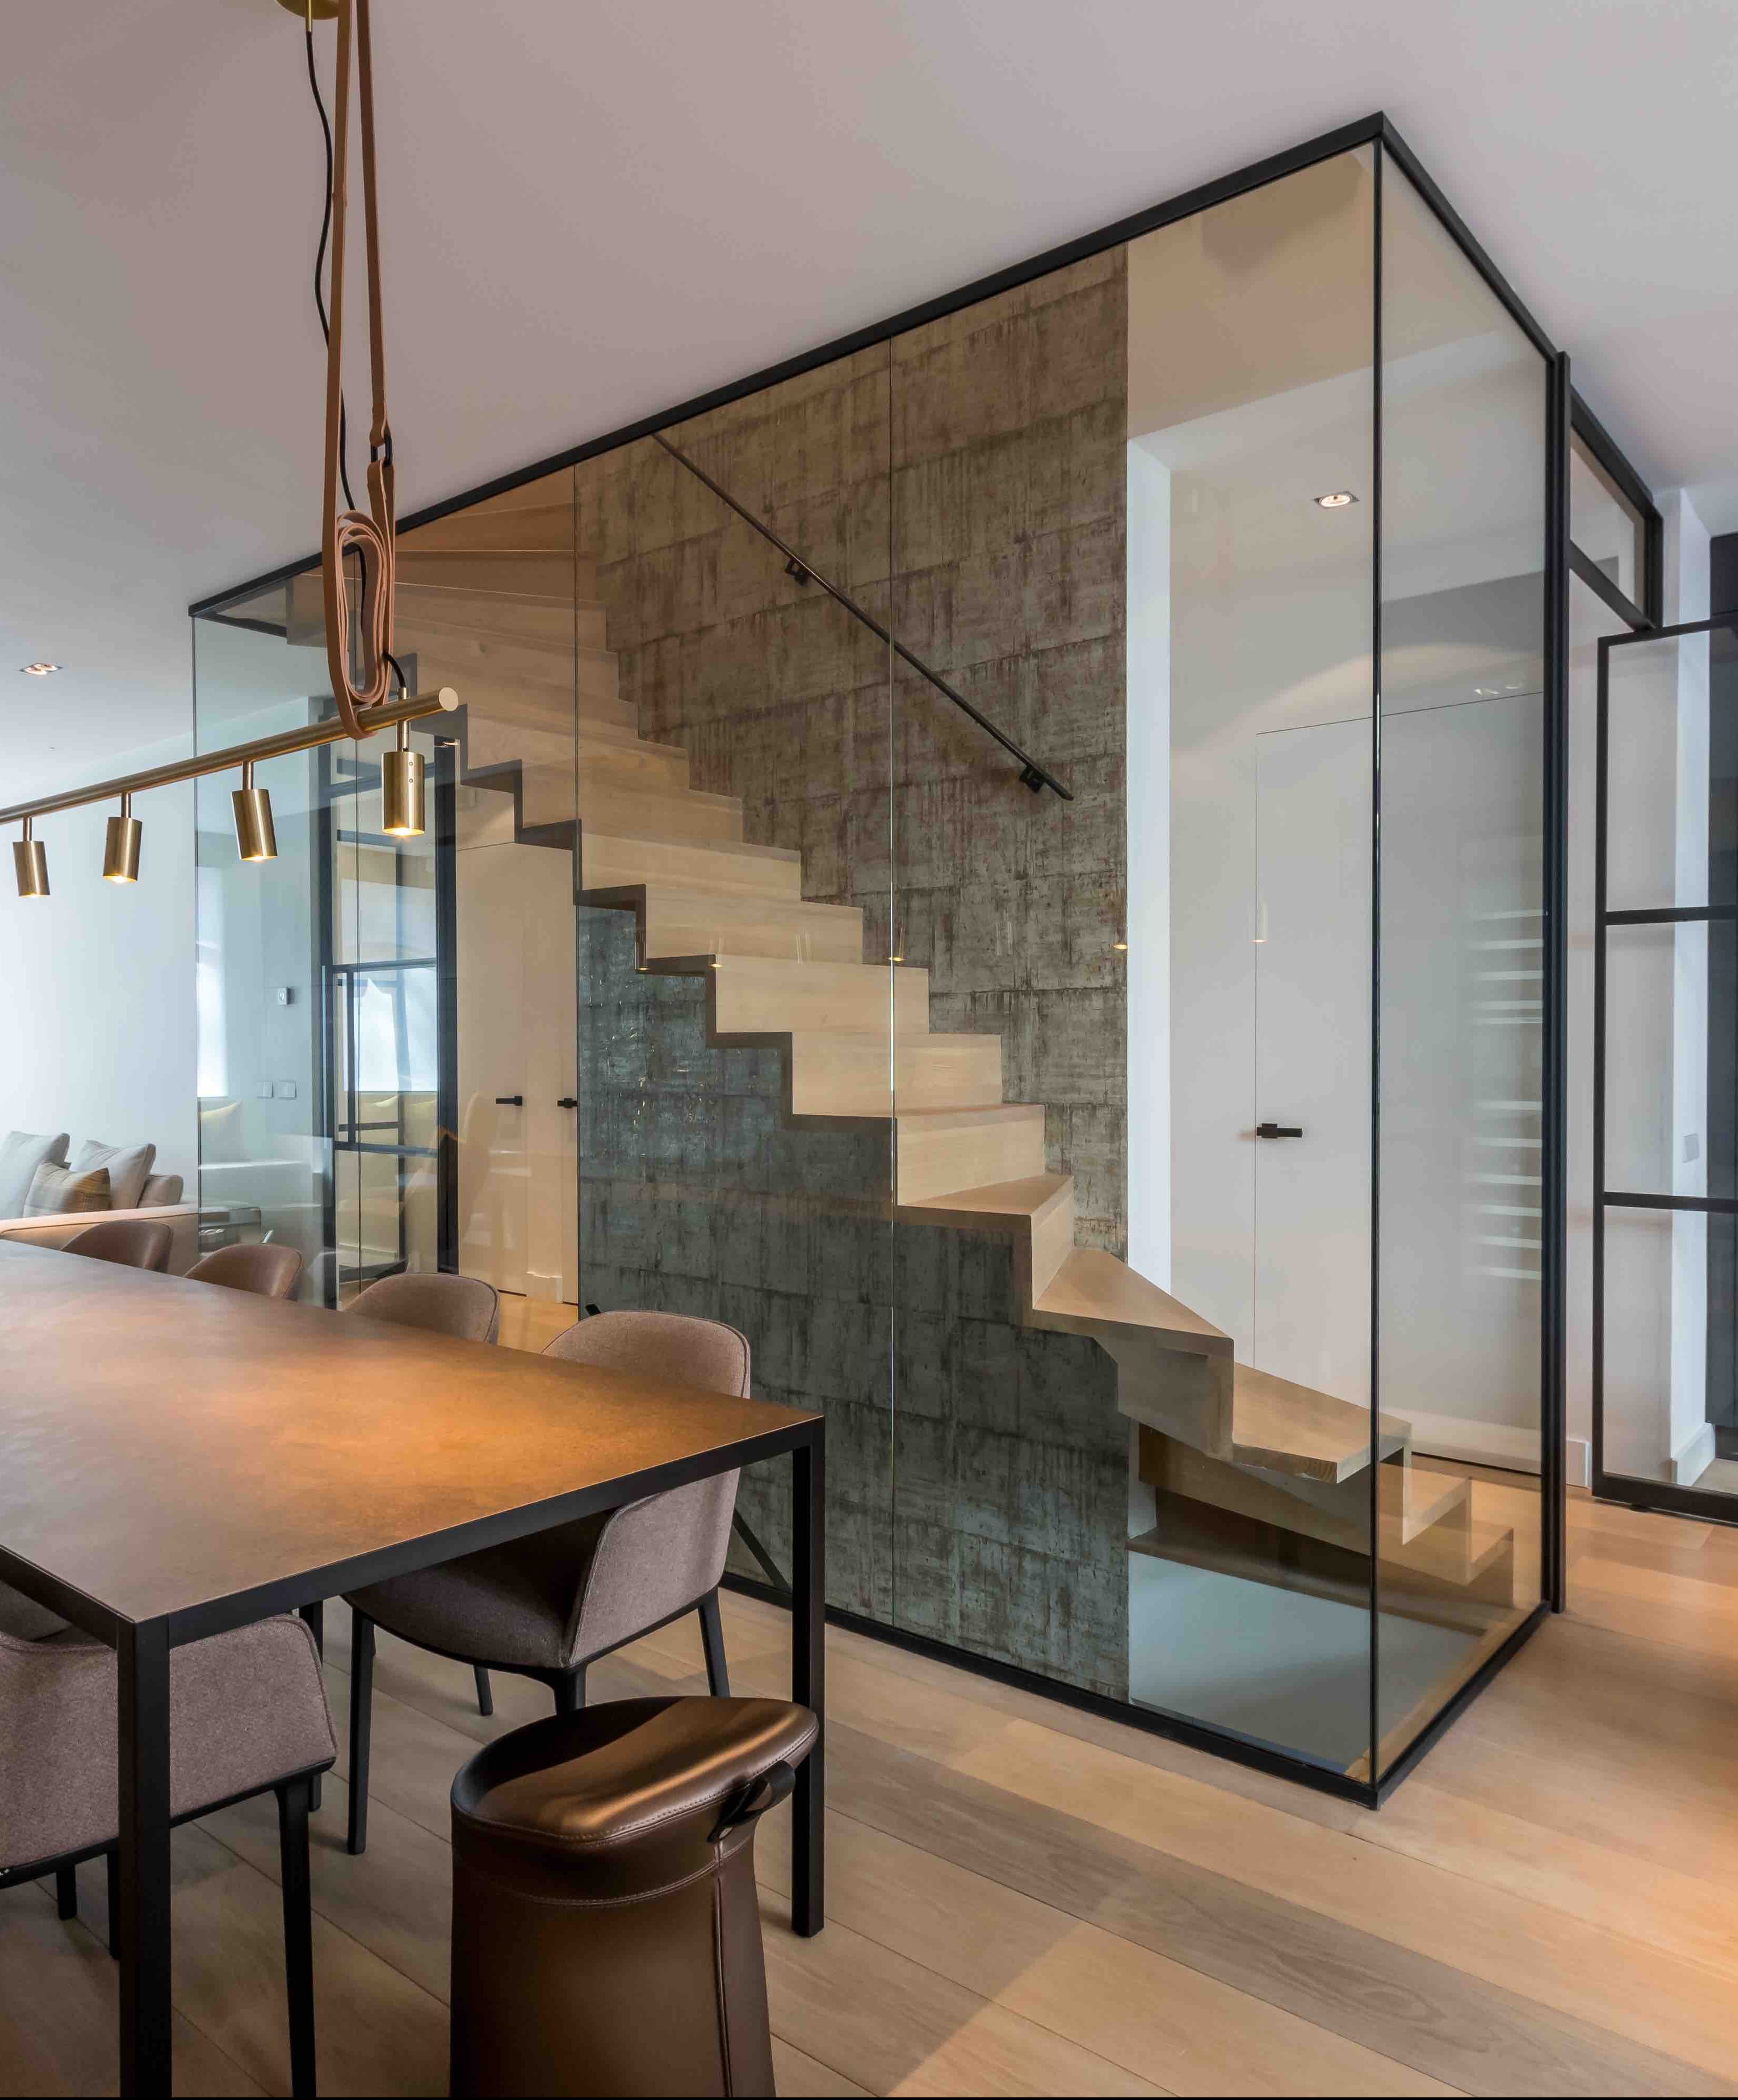 Floating stairs with glass wall